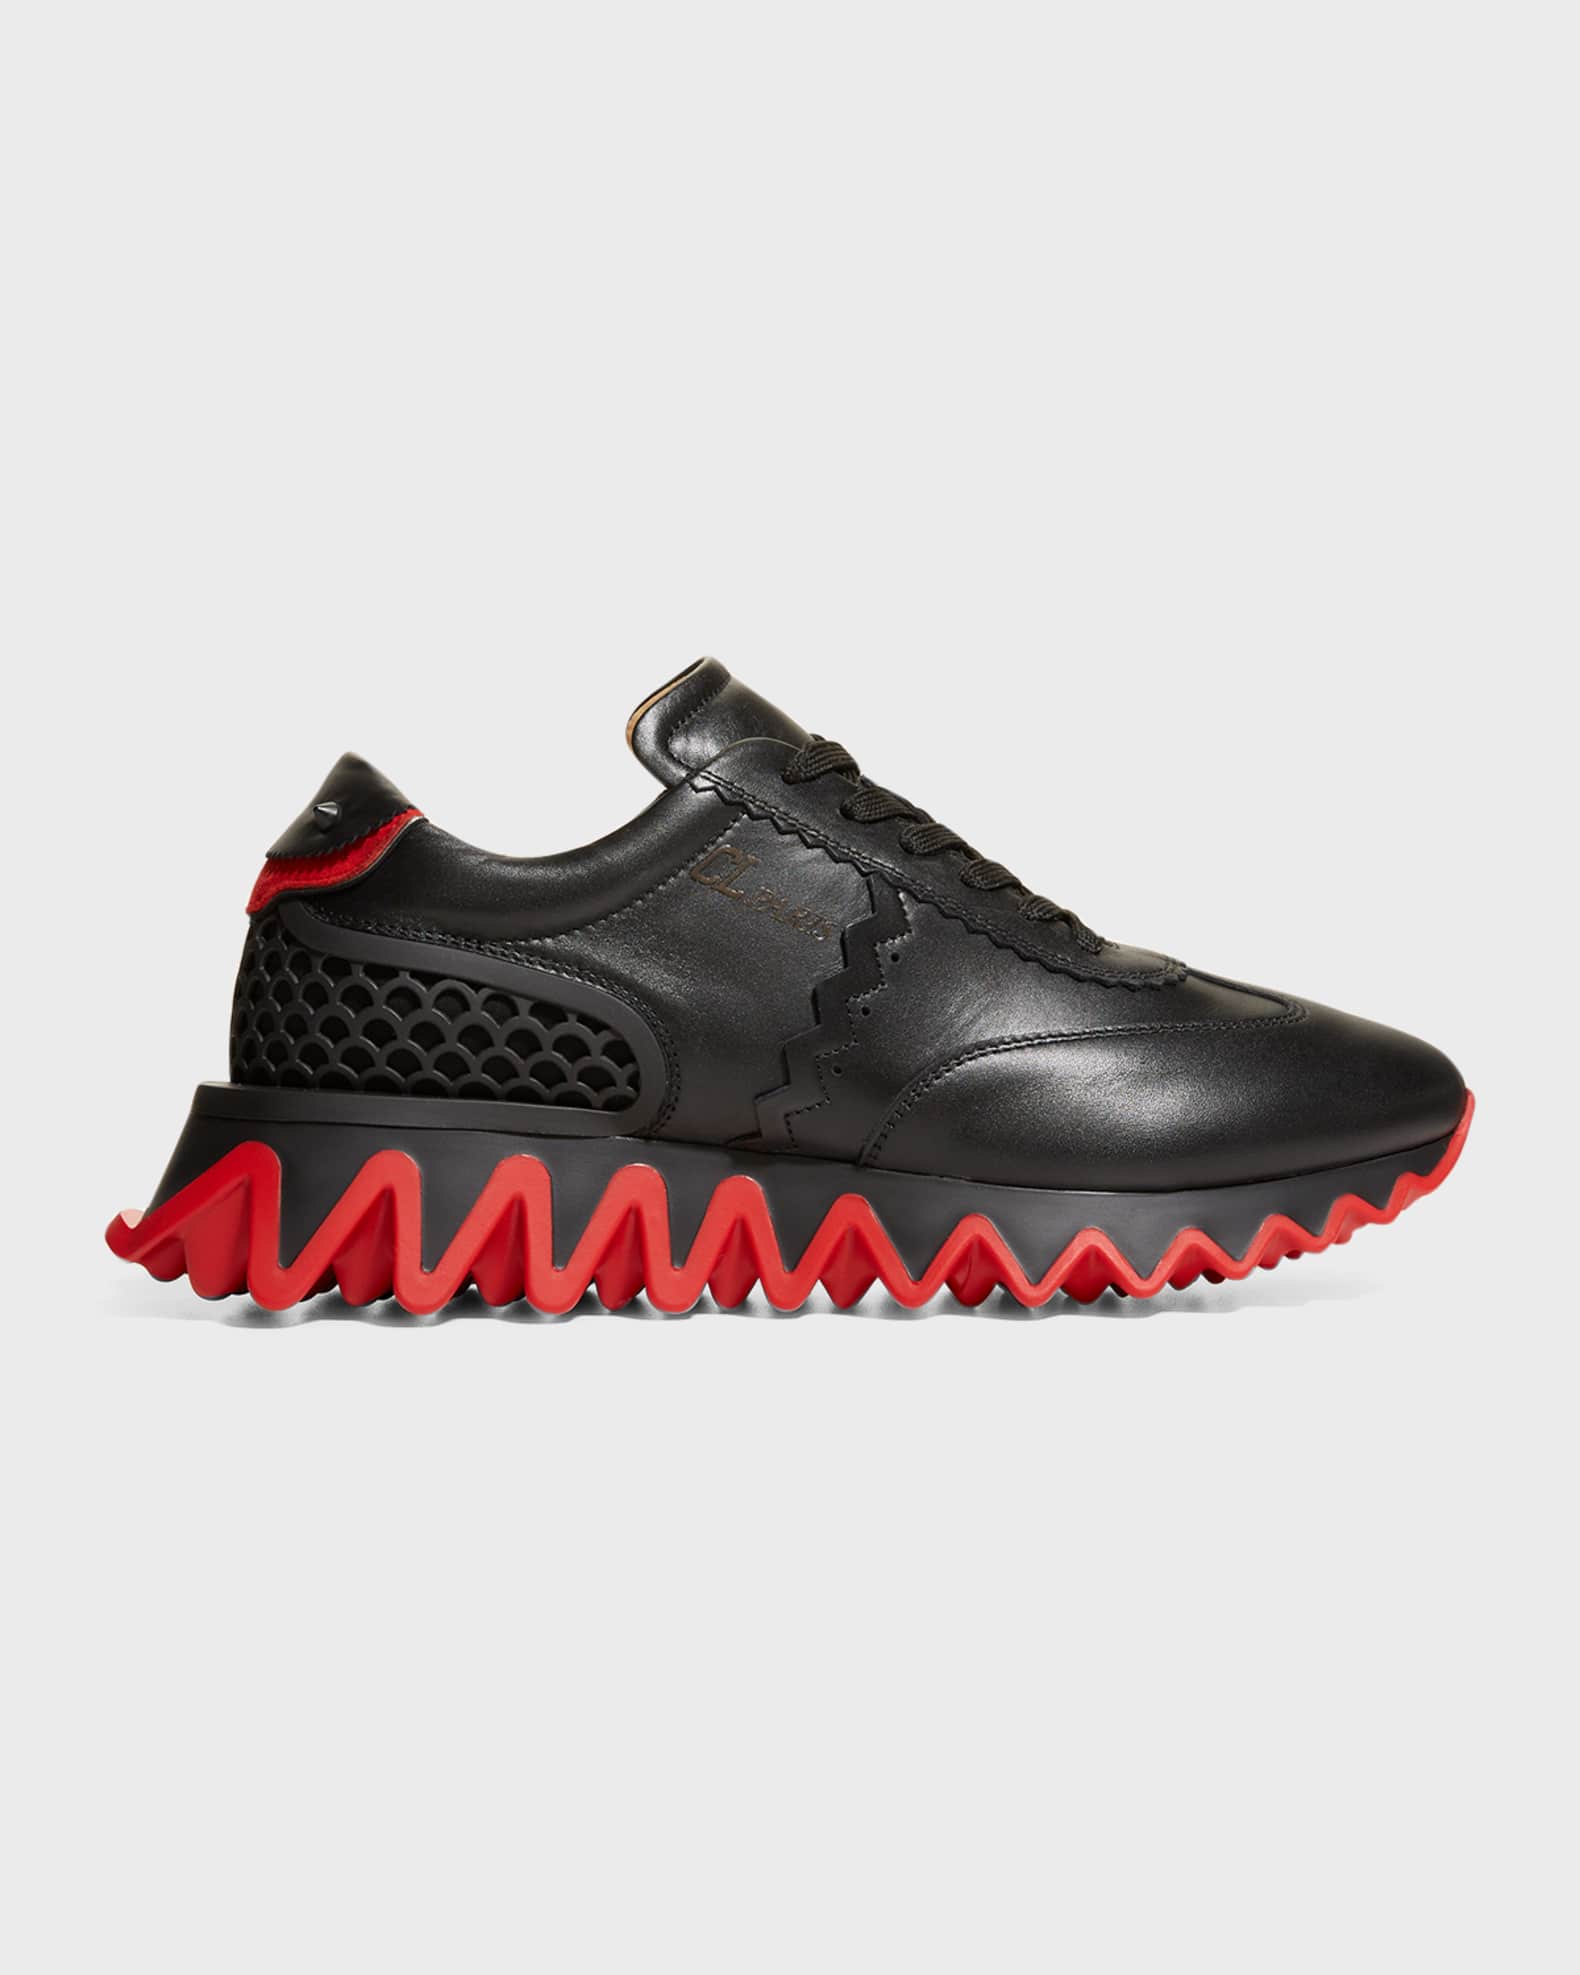 2023 Mens Shoes Red Bottoms Luxurys Designers High Low Tops Studded Spikes  Fashion Suede Leather Black Silver Women Flat Sneaker Party Casual Walking  Jogging Boots From Trending_sneakerss, $51.55